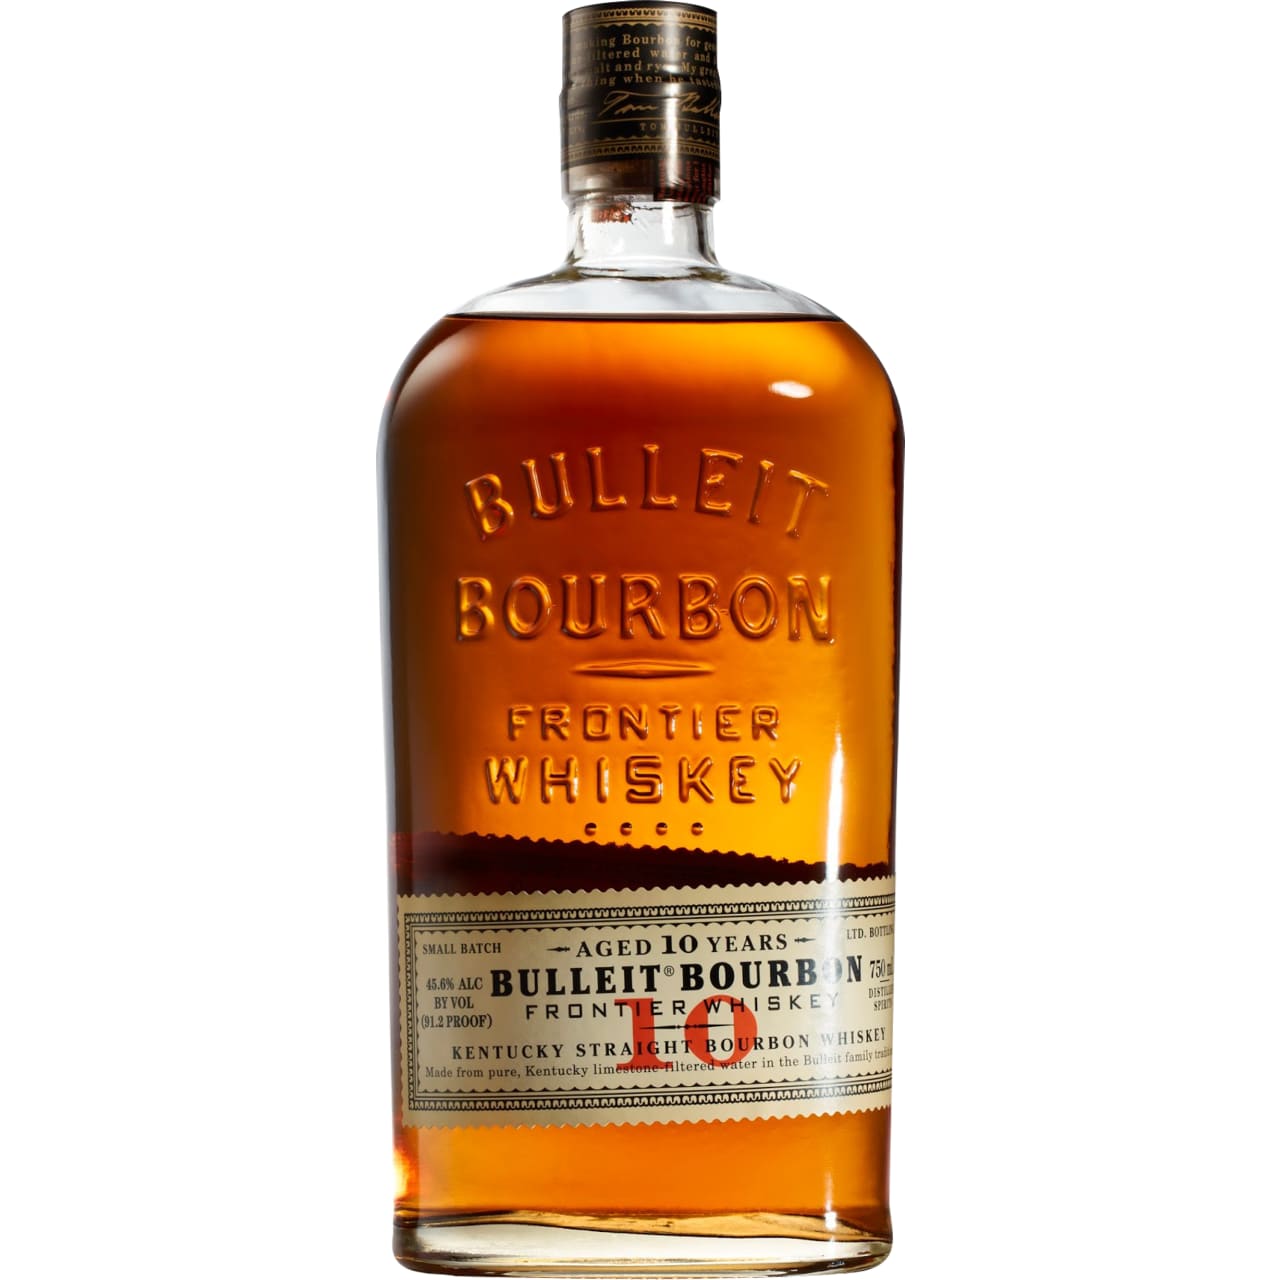 Special expression of Bulleit that provides a rich, deep, incredibly smooth sipping experience.